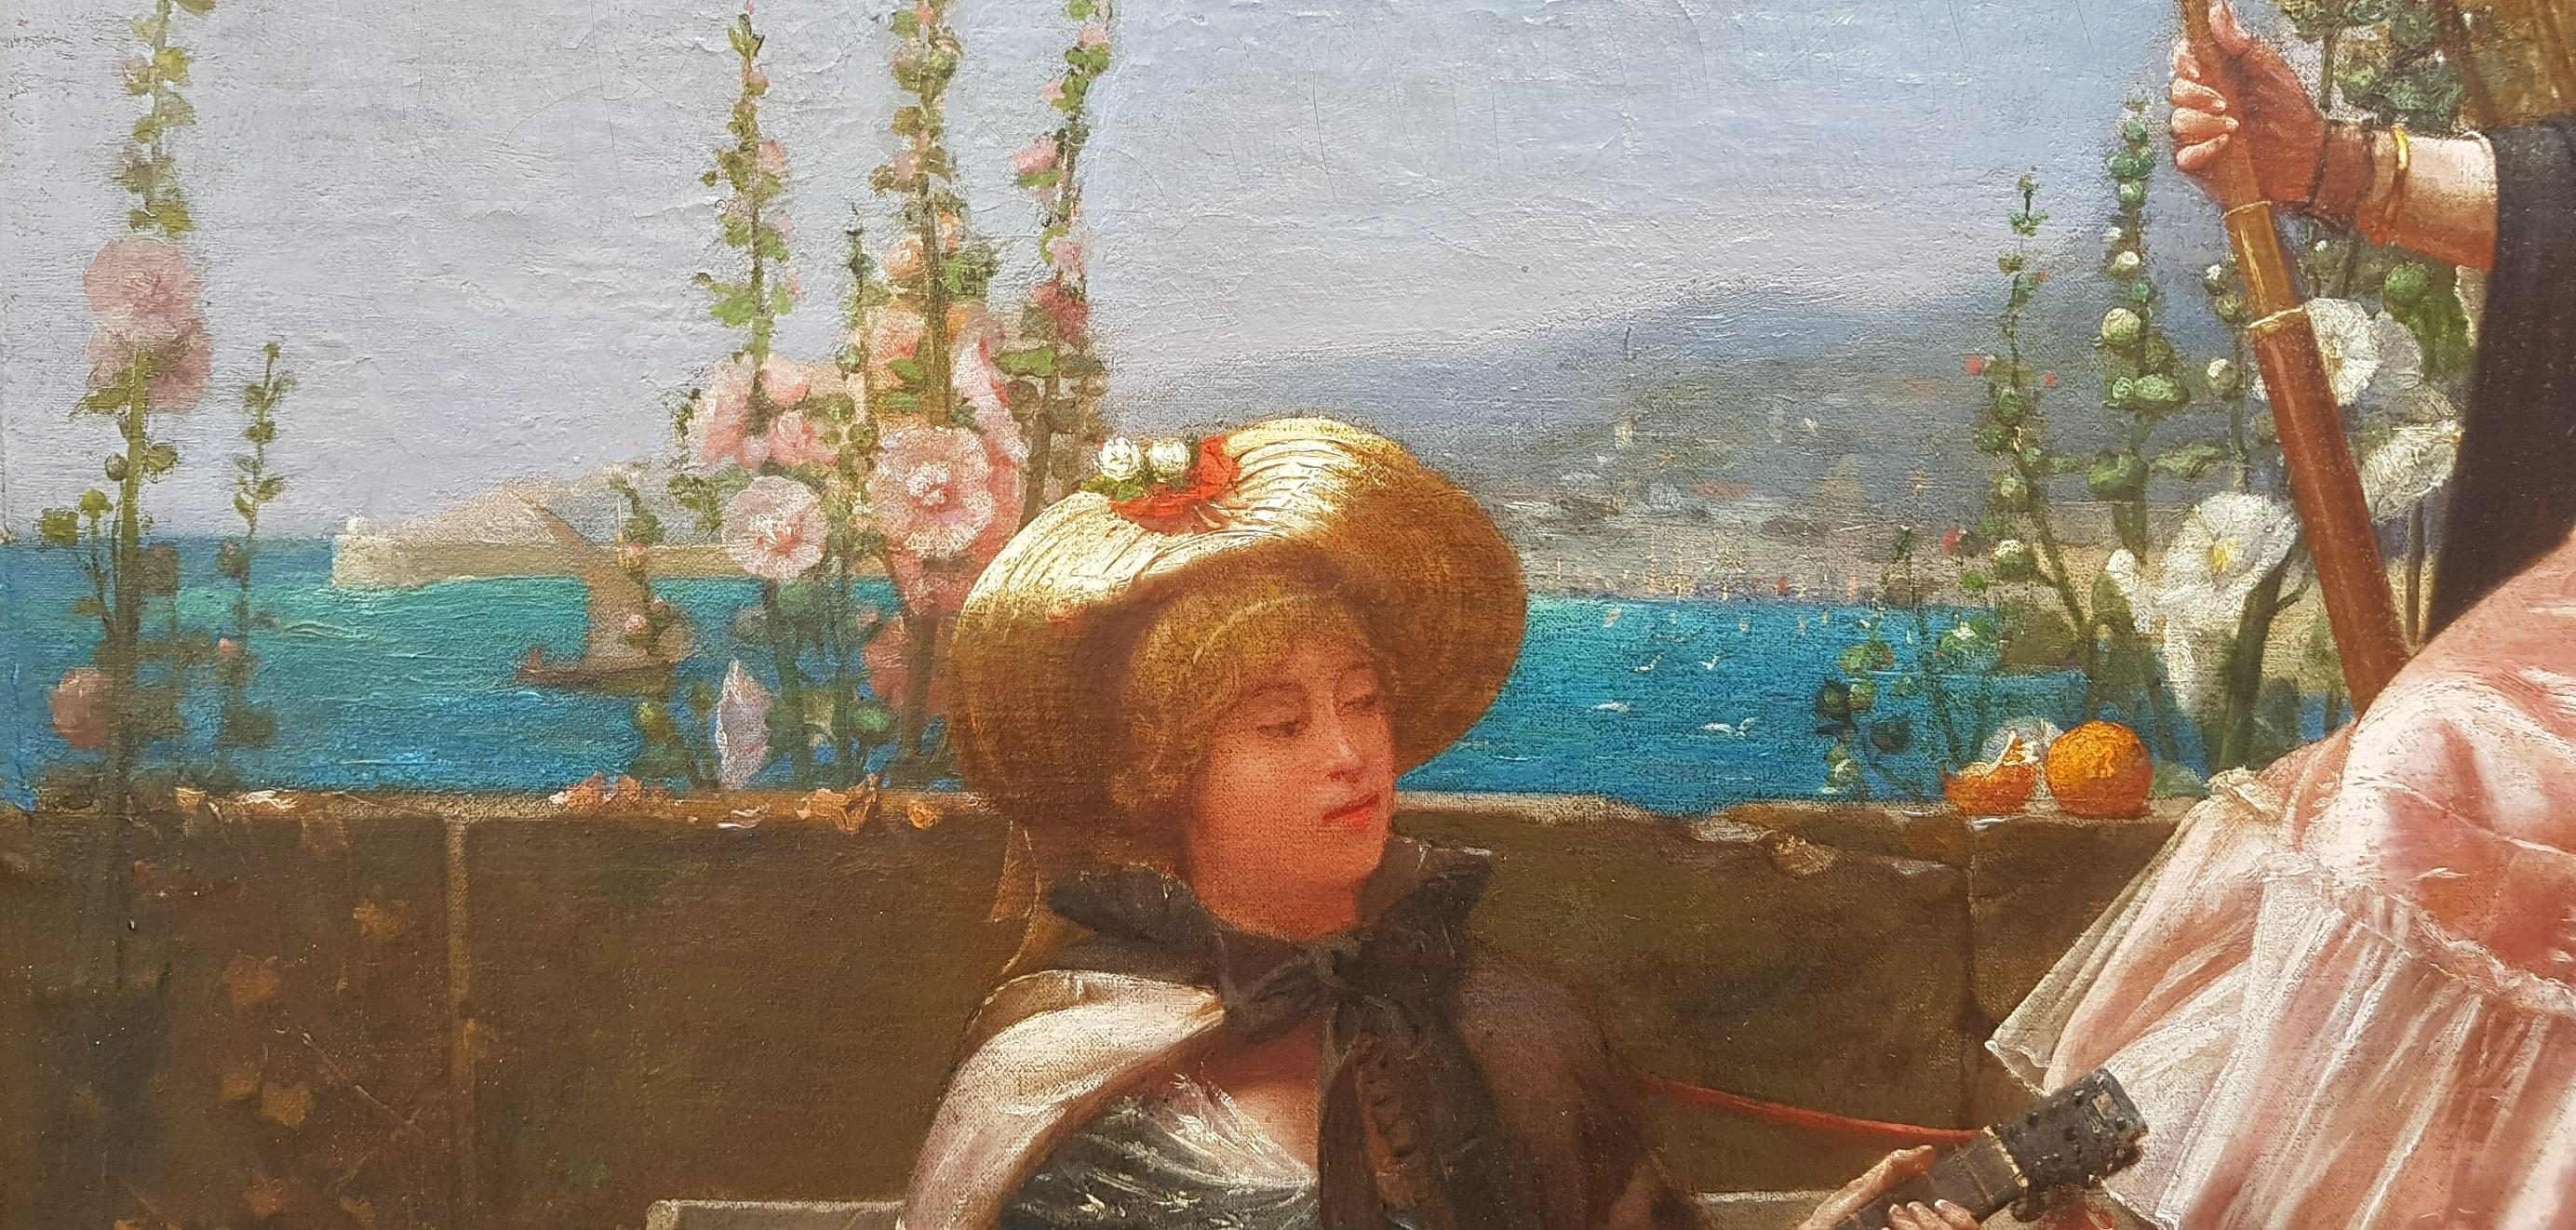 Georges DEVY (Active at the end of the 19th century) Oil on canvas 86 cm x 65 cm (96 x 76 cm with the frame) Signed and dated lower left 